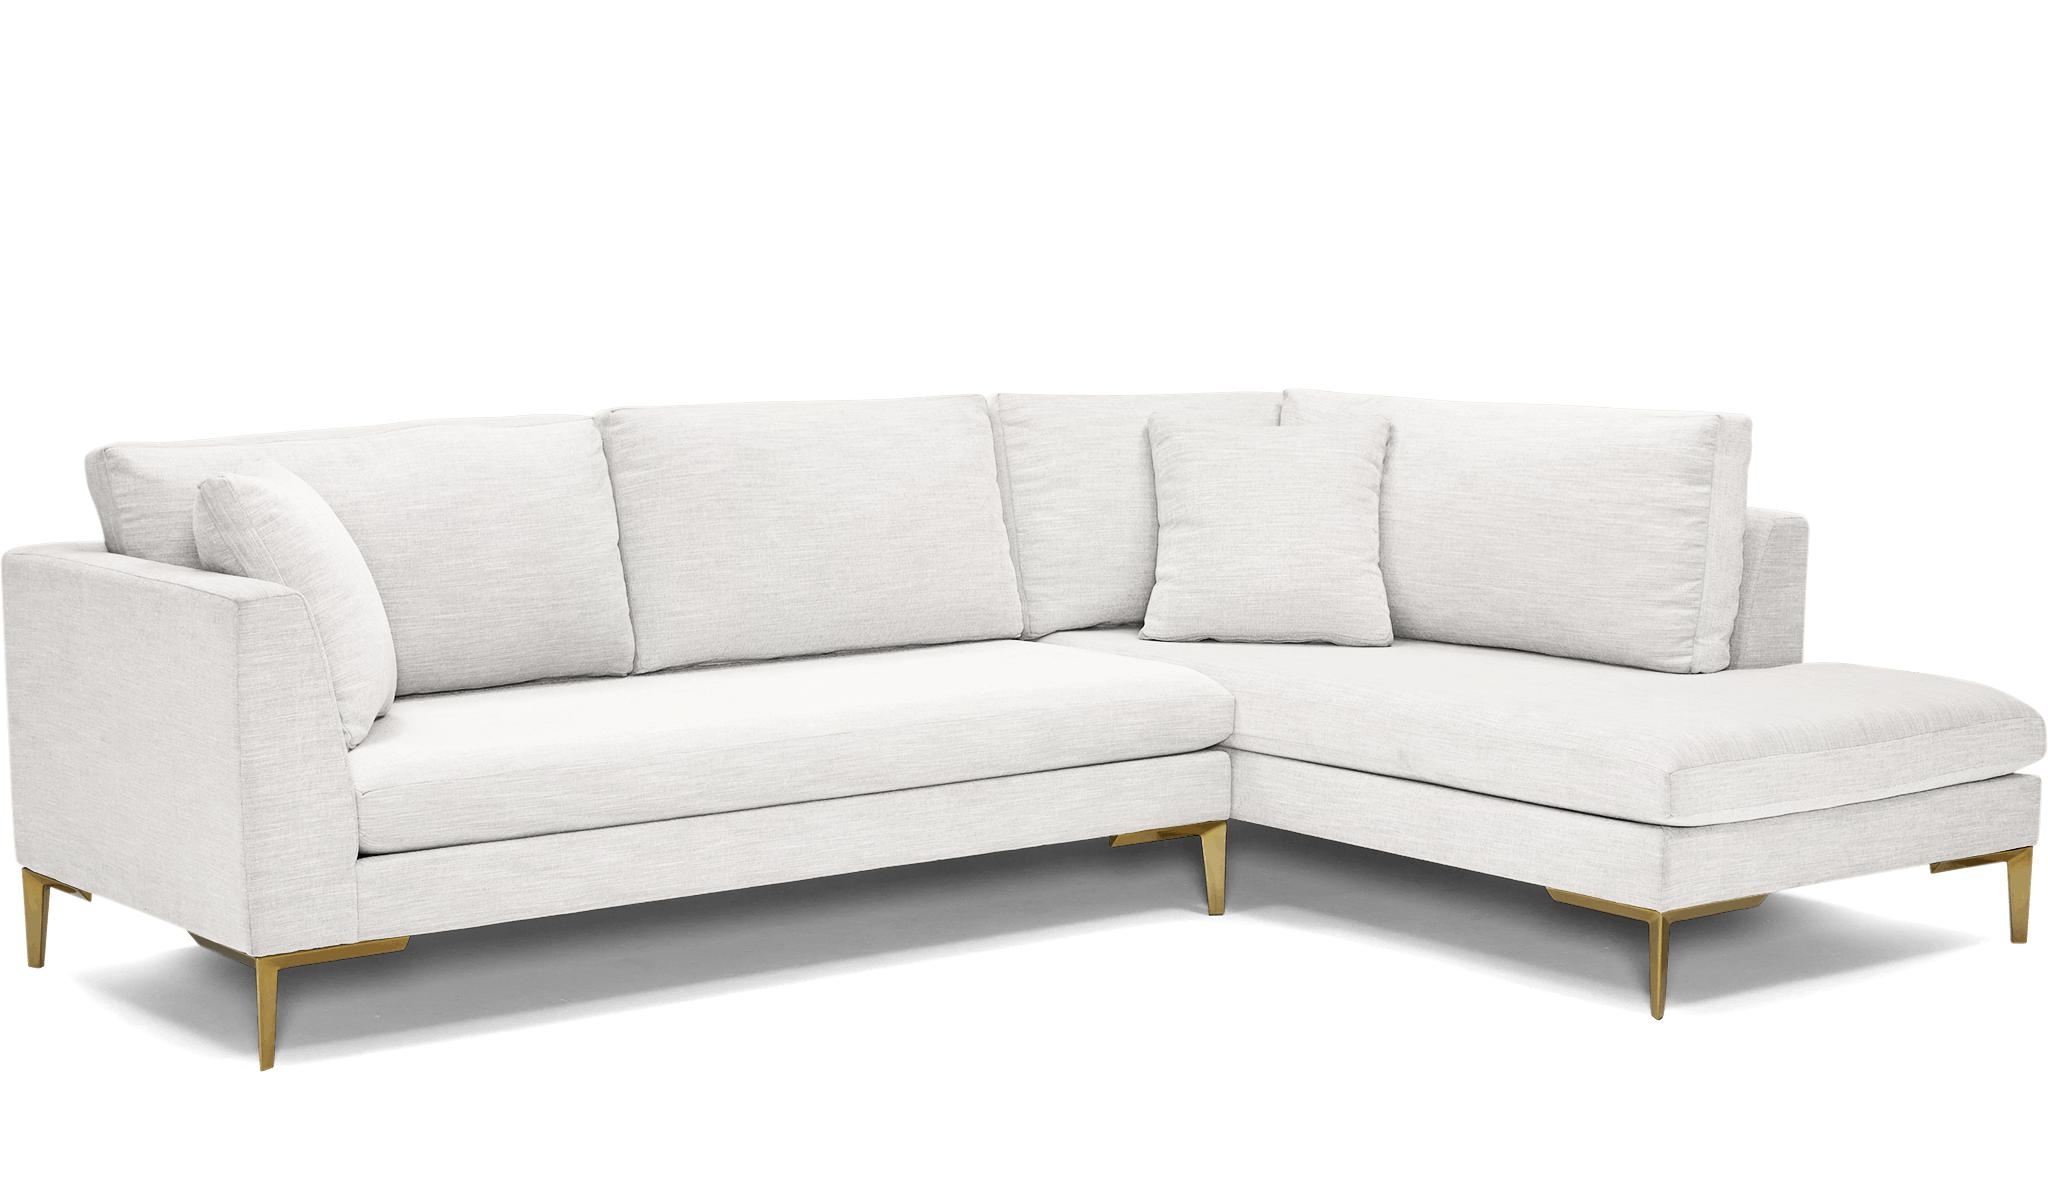 White Ainsley Mid Century Modern Sectional with Bumper - Tussah Blizzard - Left - Image 1